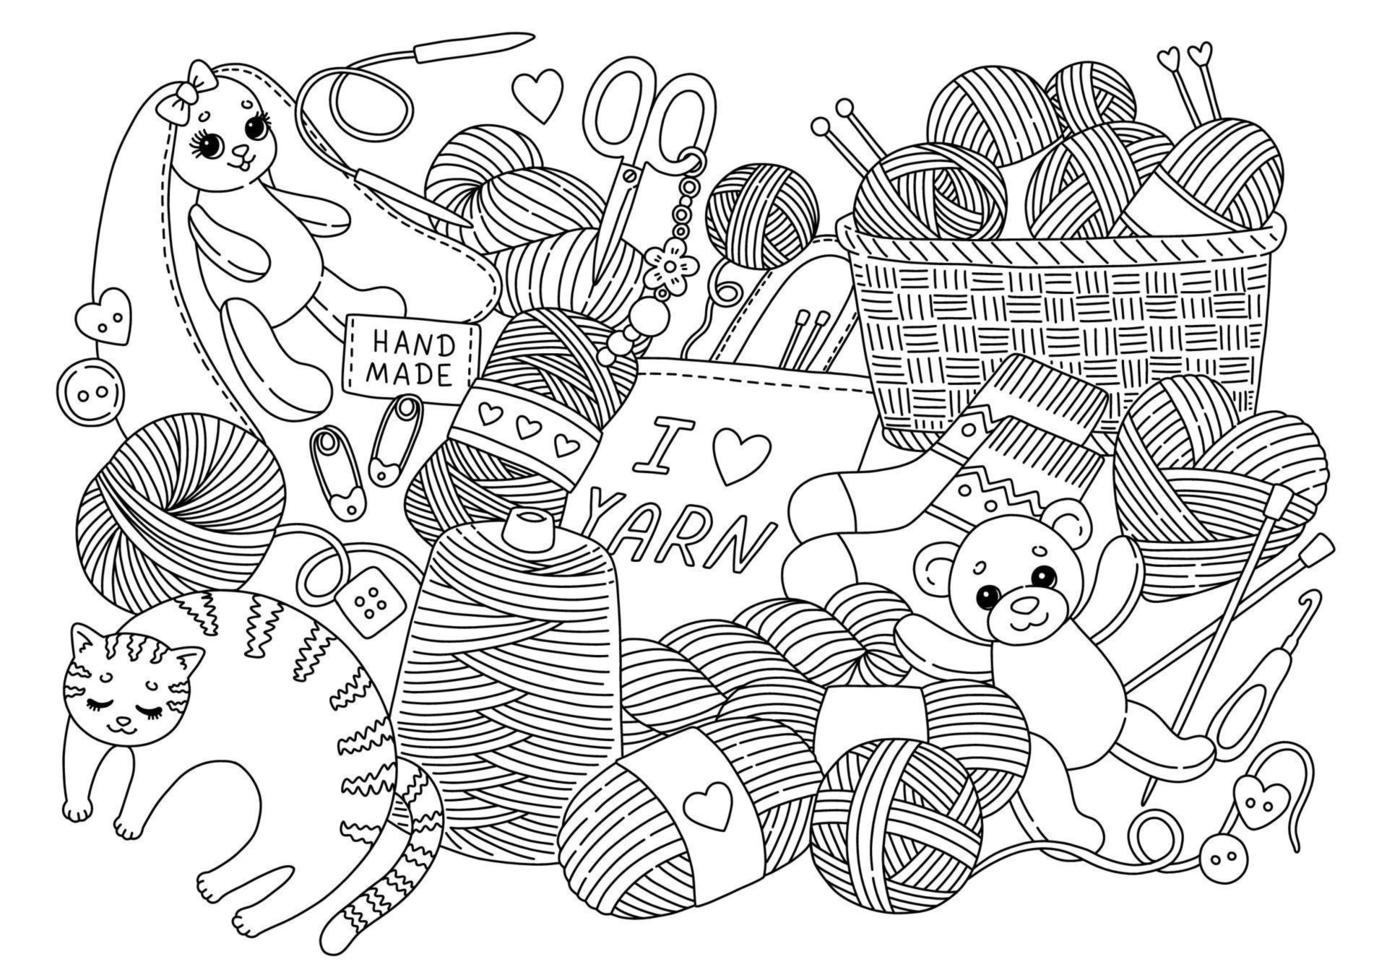 Yarn and knitting doodle coloring page vector illustration